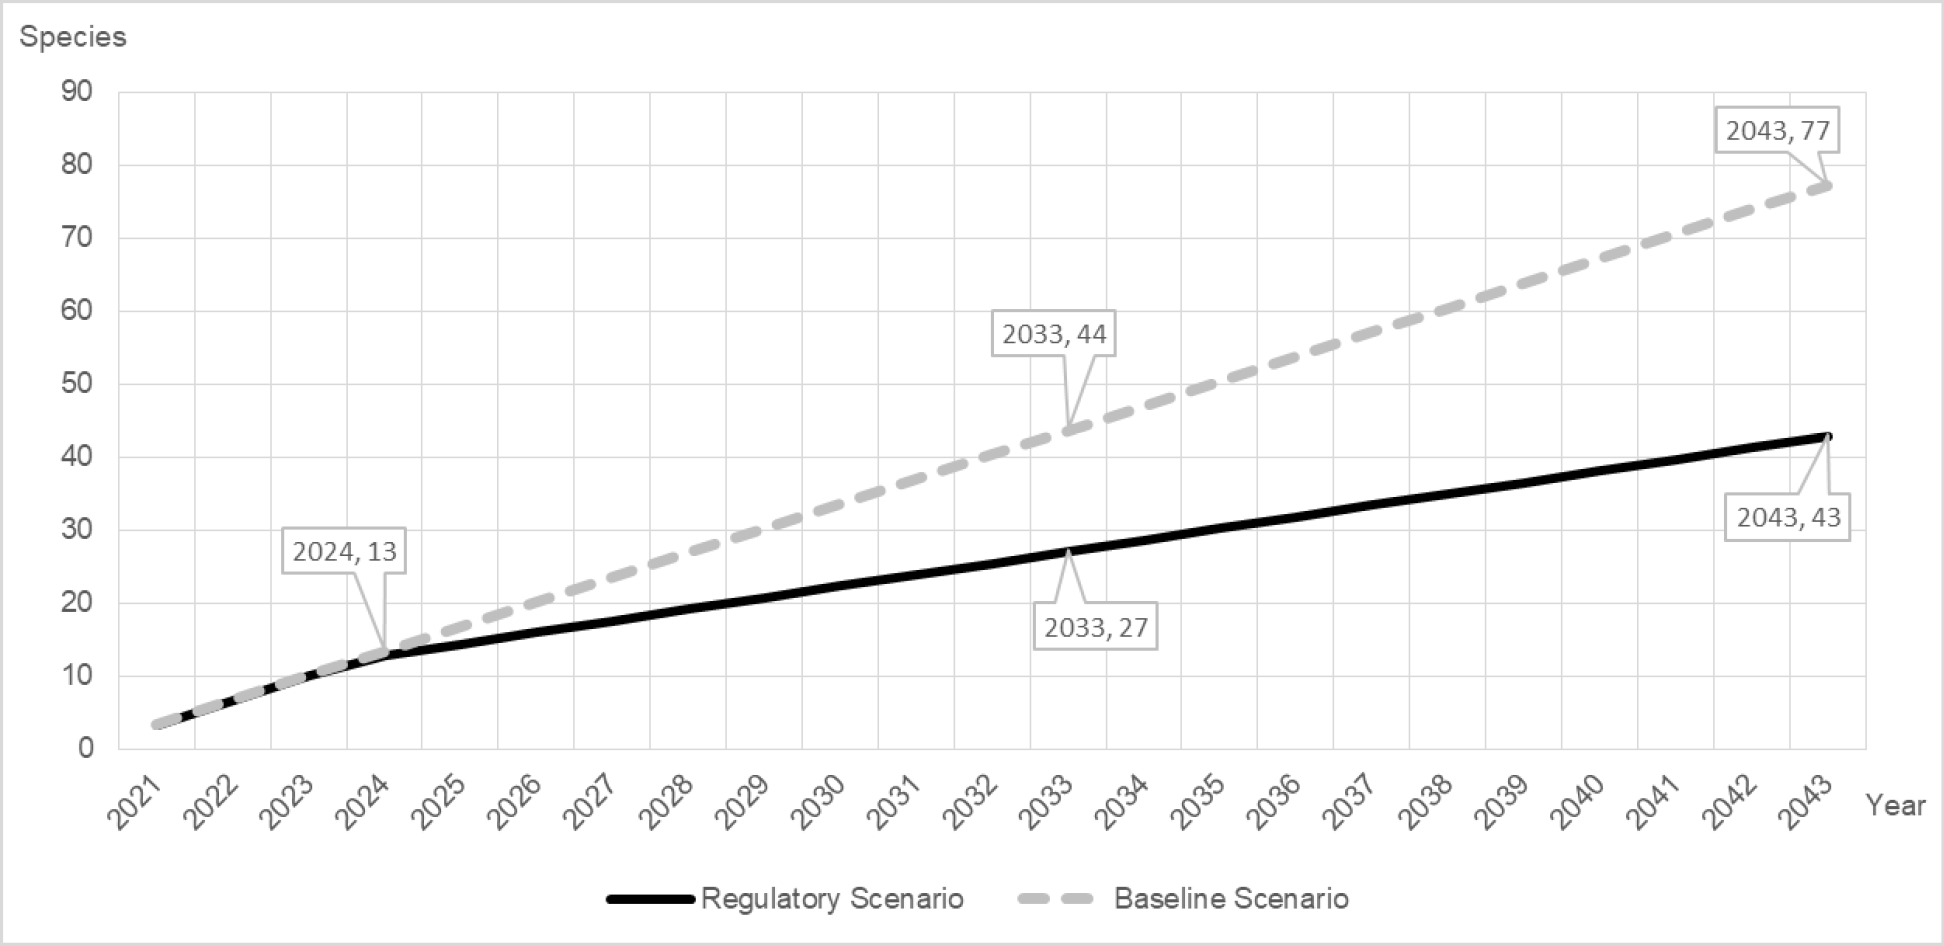 Figure 1: Number of species per year in the baseline and regulatory scenarios – Text version below the graph